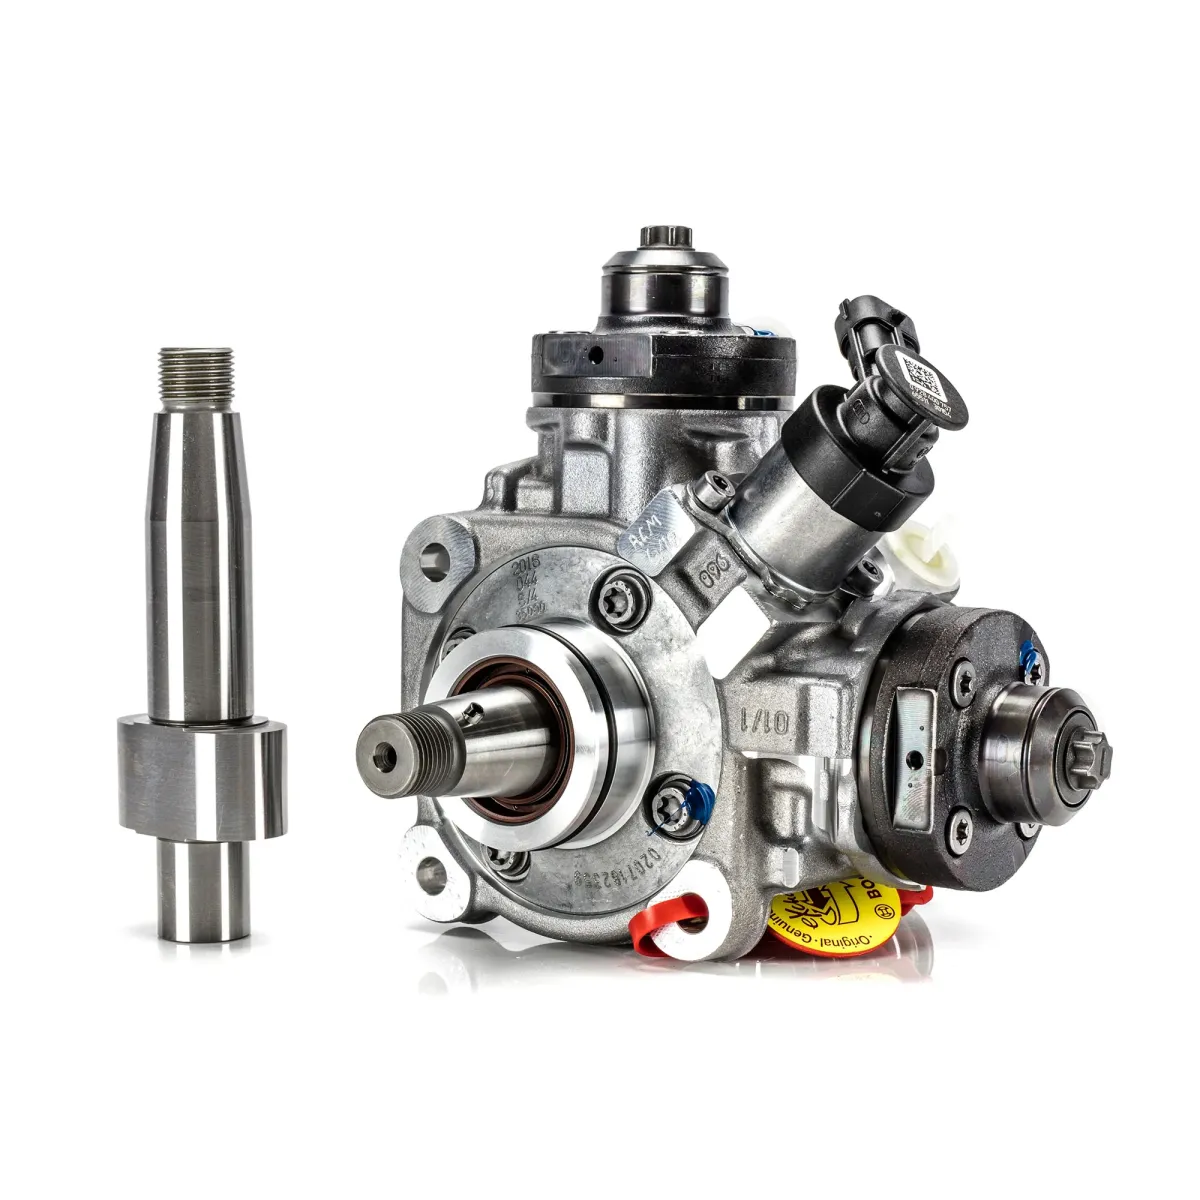 River City Diesel - RCD PERFORMANCE 2011- 2019 6.7L FORD POWERSTROKE CPX FUEL INJECTION PUMP +38% UP TO 850HP